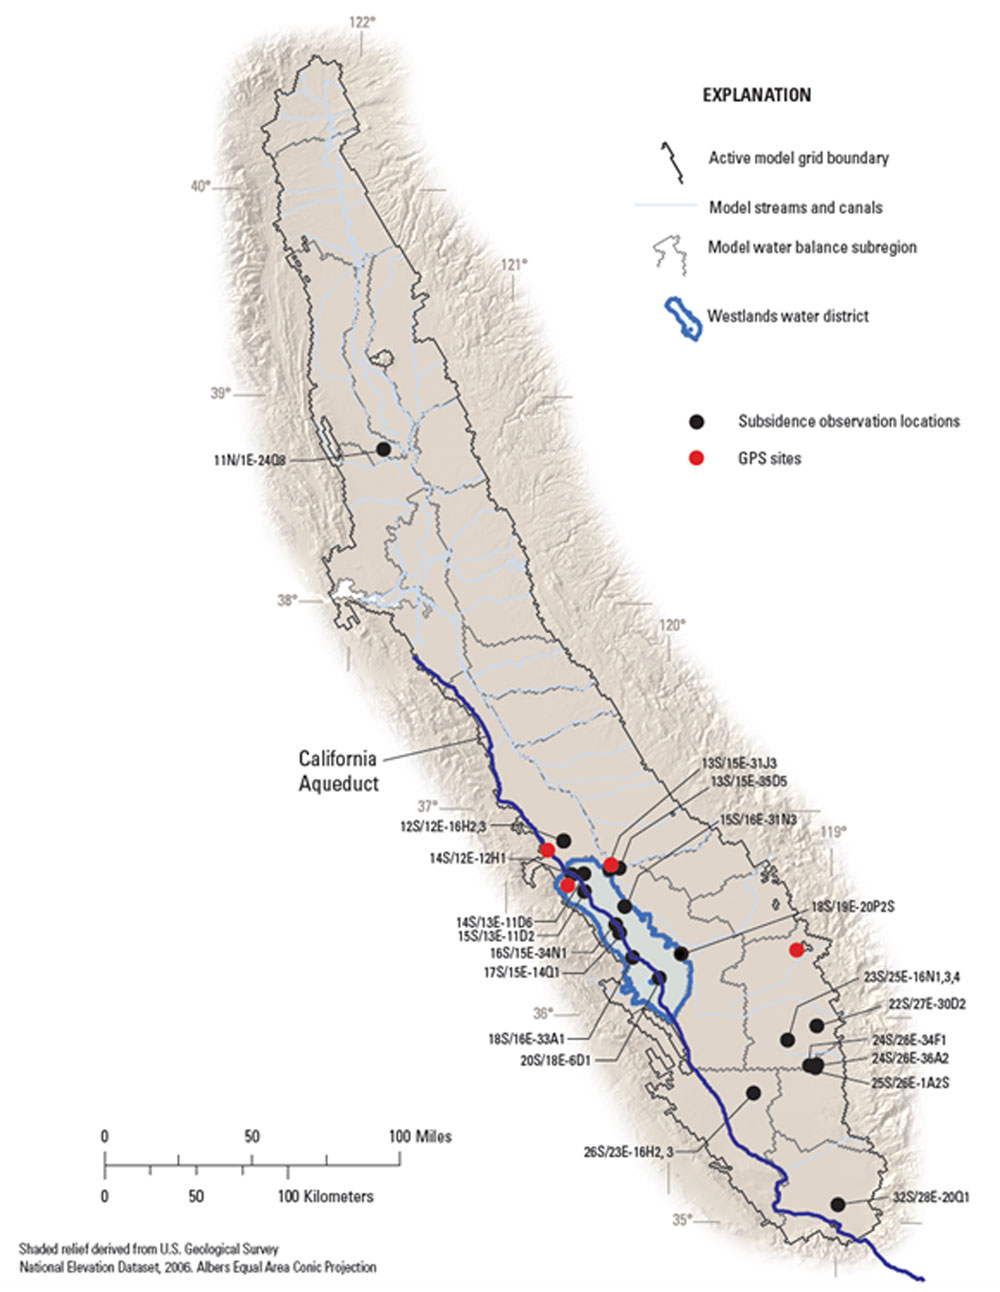 Map of the location of historical extensometers used to measure subsidence and continuous GPS sites in the San Joaquin Valley.